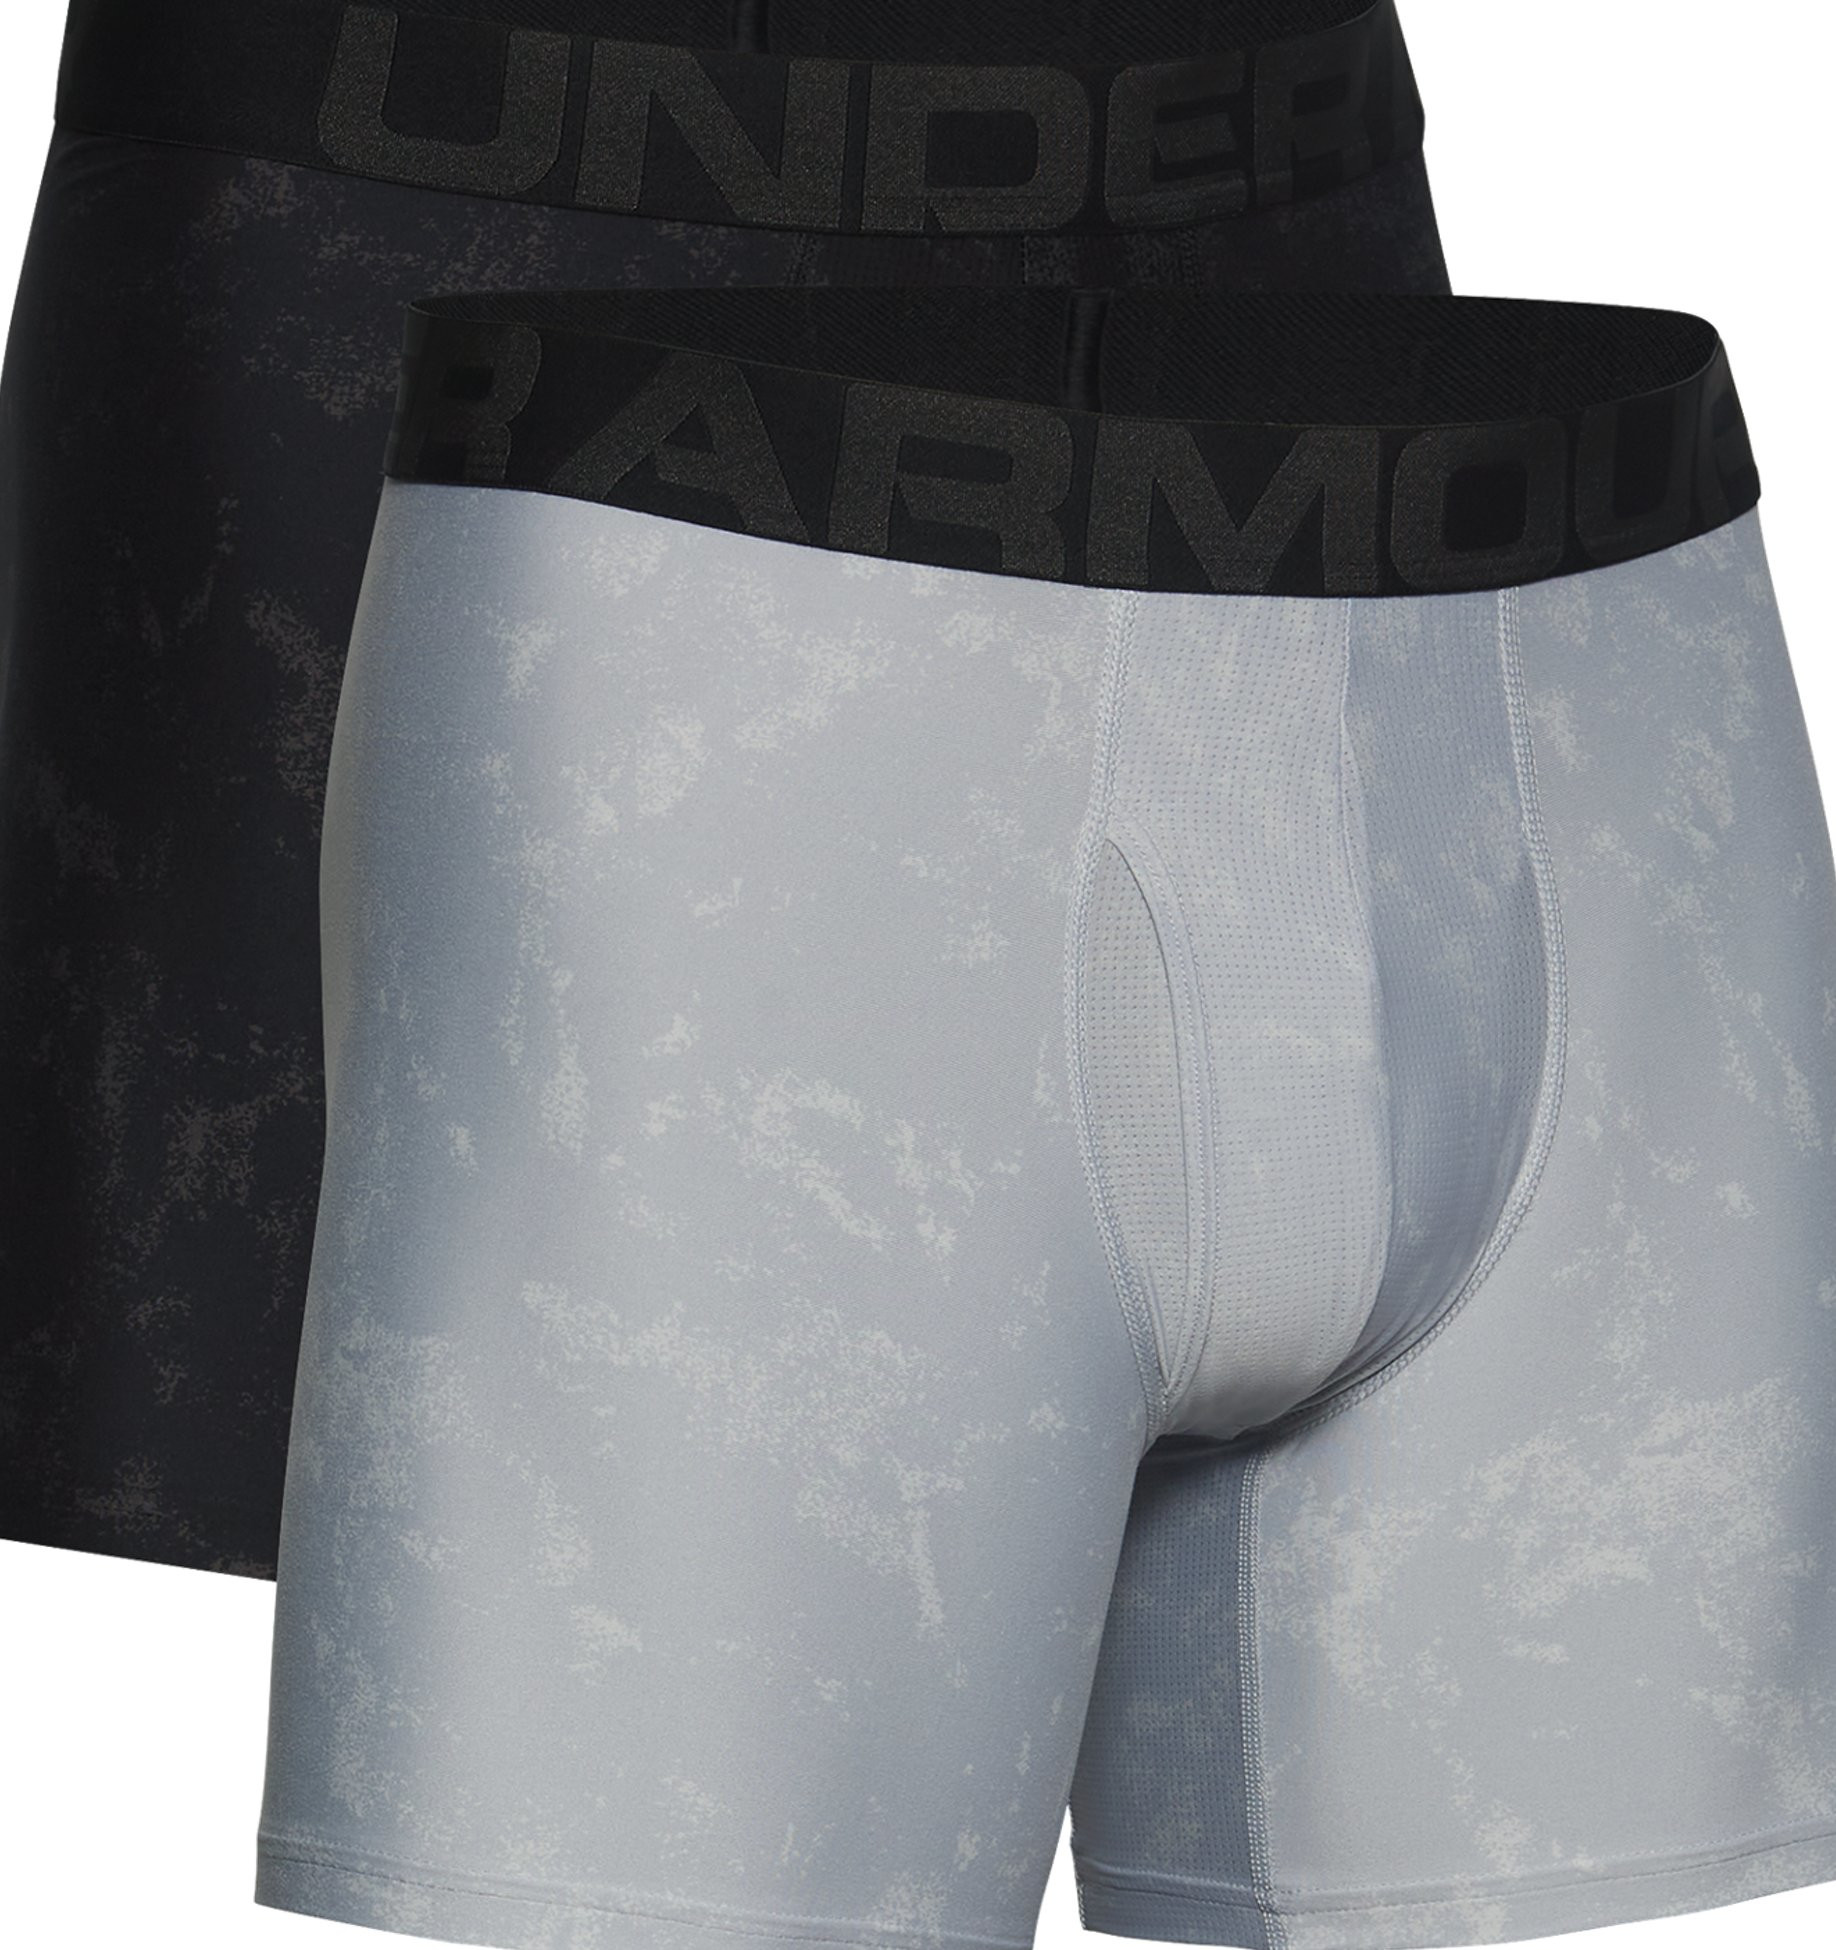 Boxerky Under Armour UA Tech 6in Novelty 2 Pack